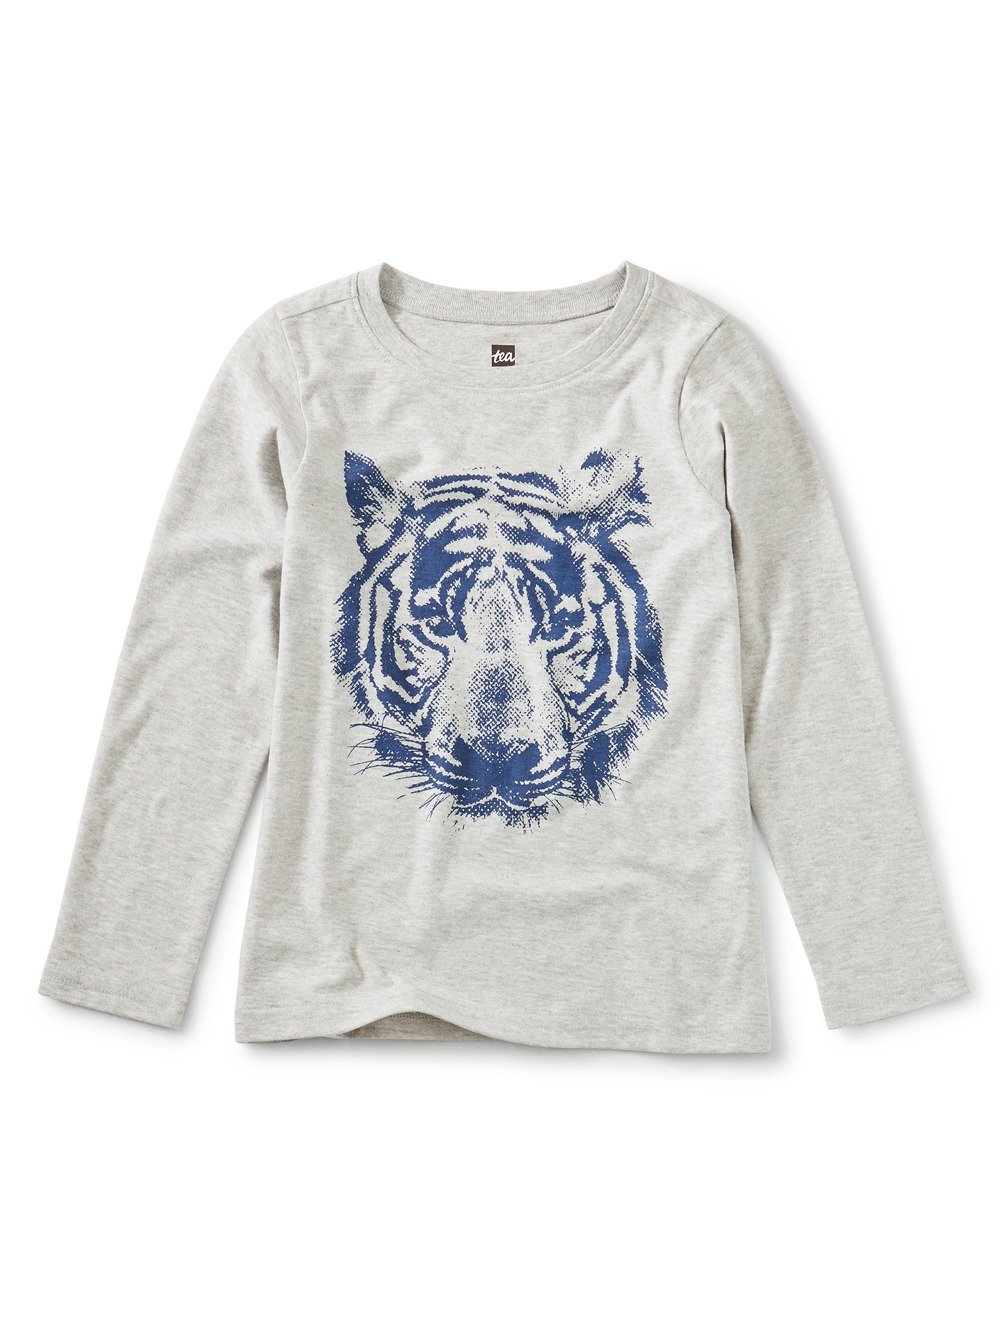 Tiger Graphic Tee | Tea Collection